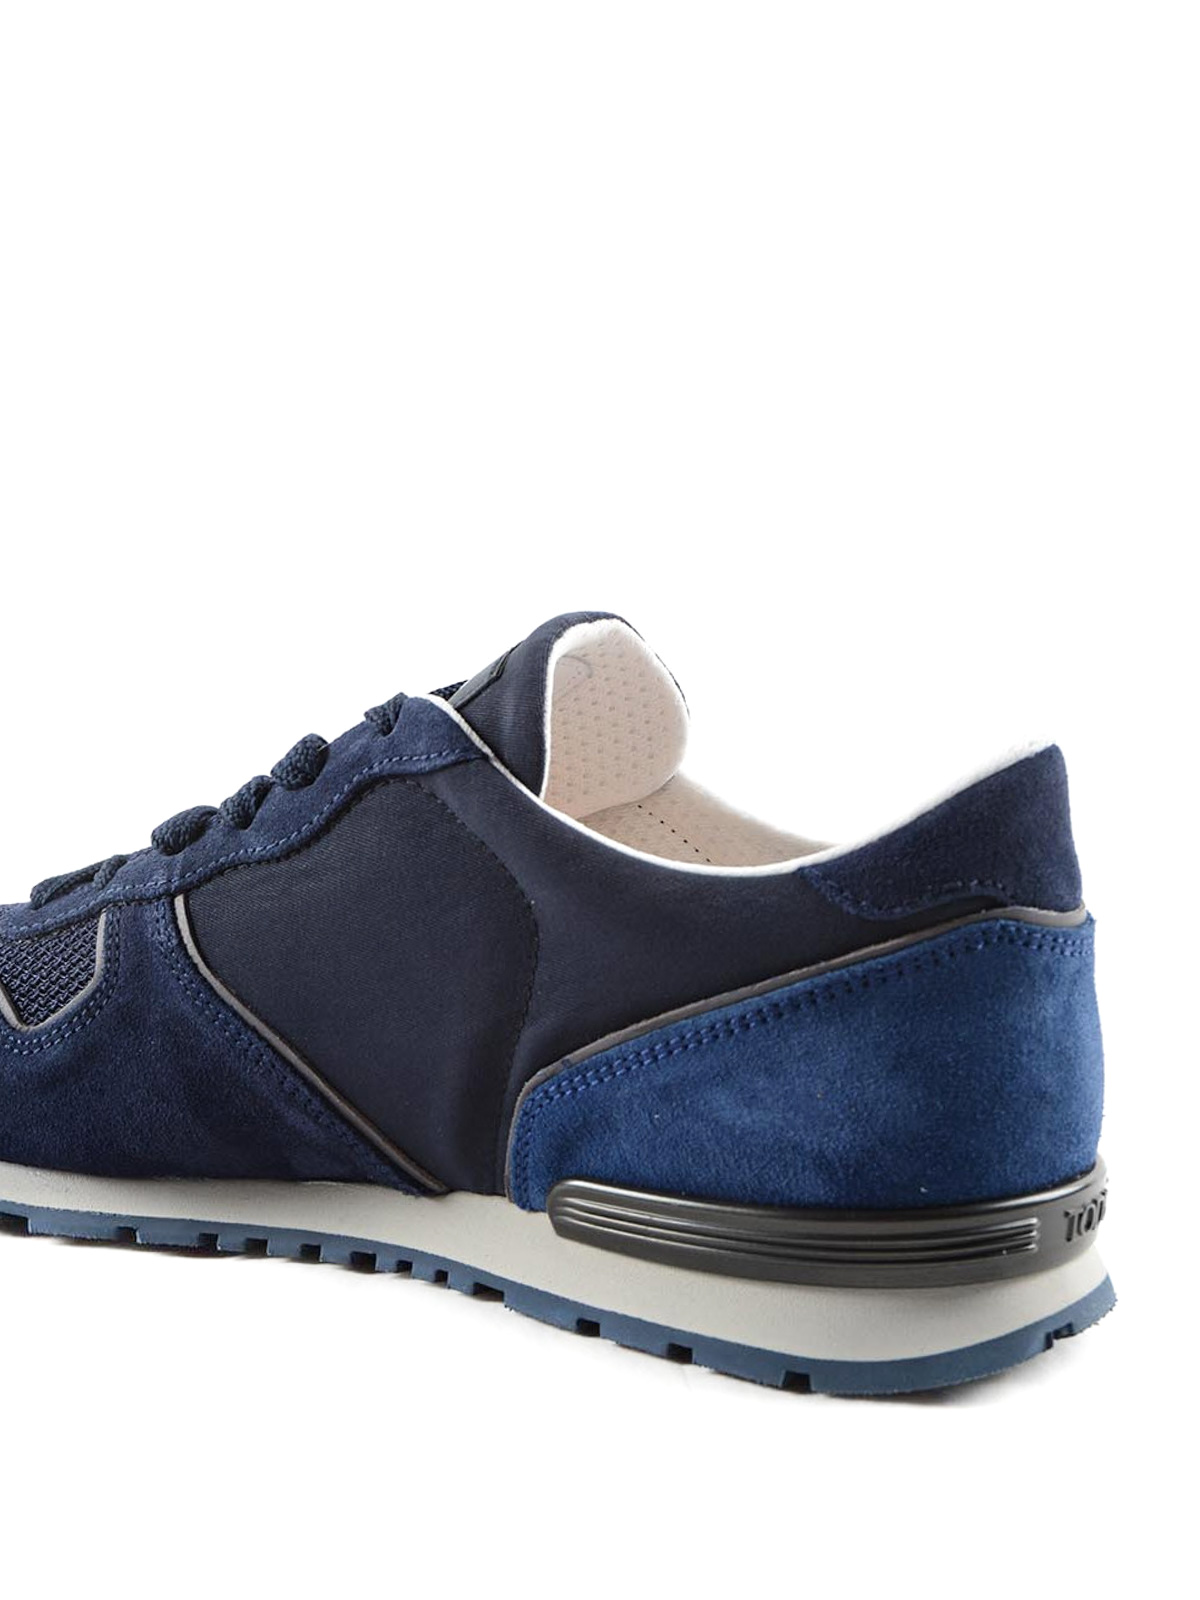 tod's sport shoes